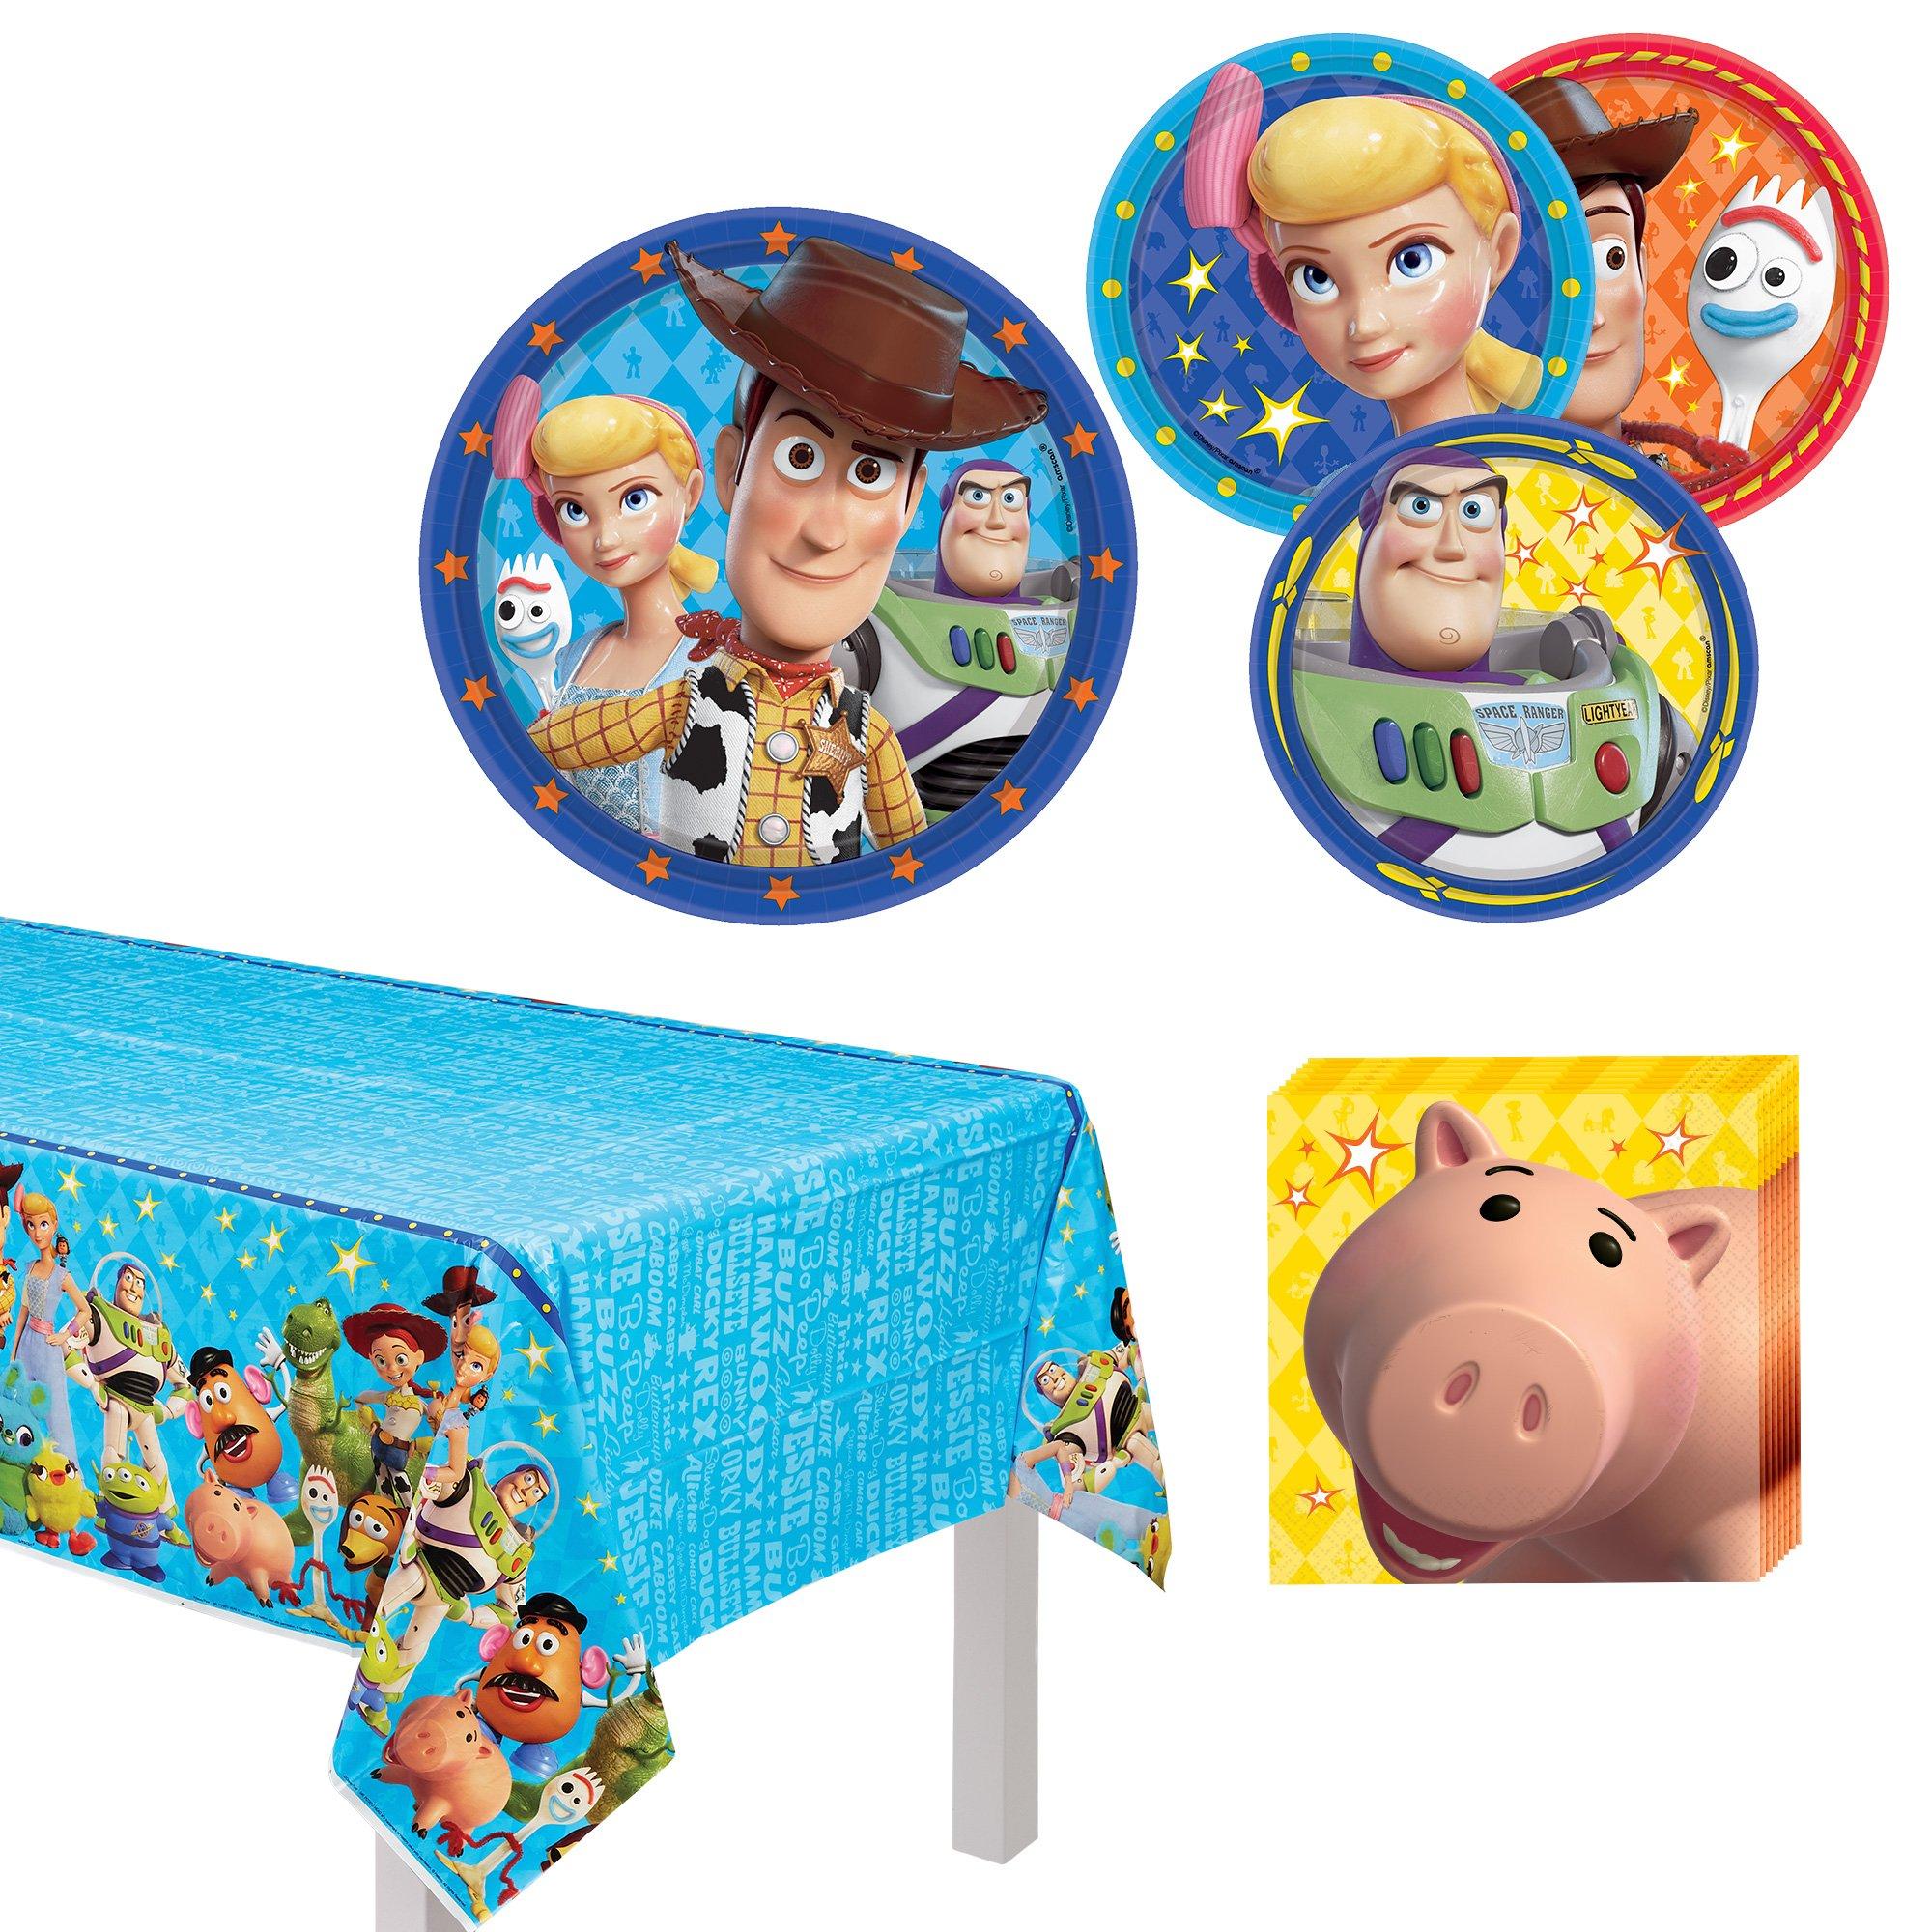 Toy Story 4 Core Birthday Party Supplies Pack for 8 Guests - Kit Includes Plates, Napkins & Table Cover